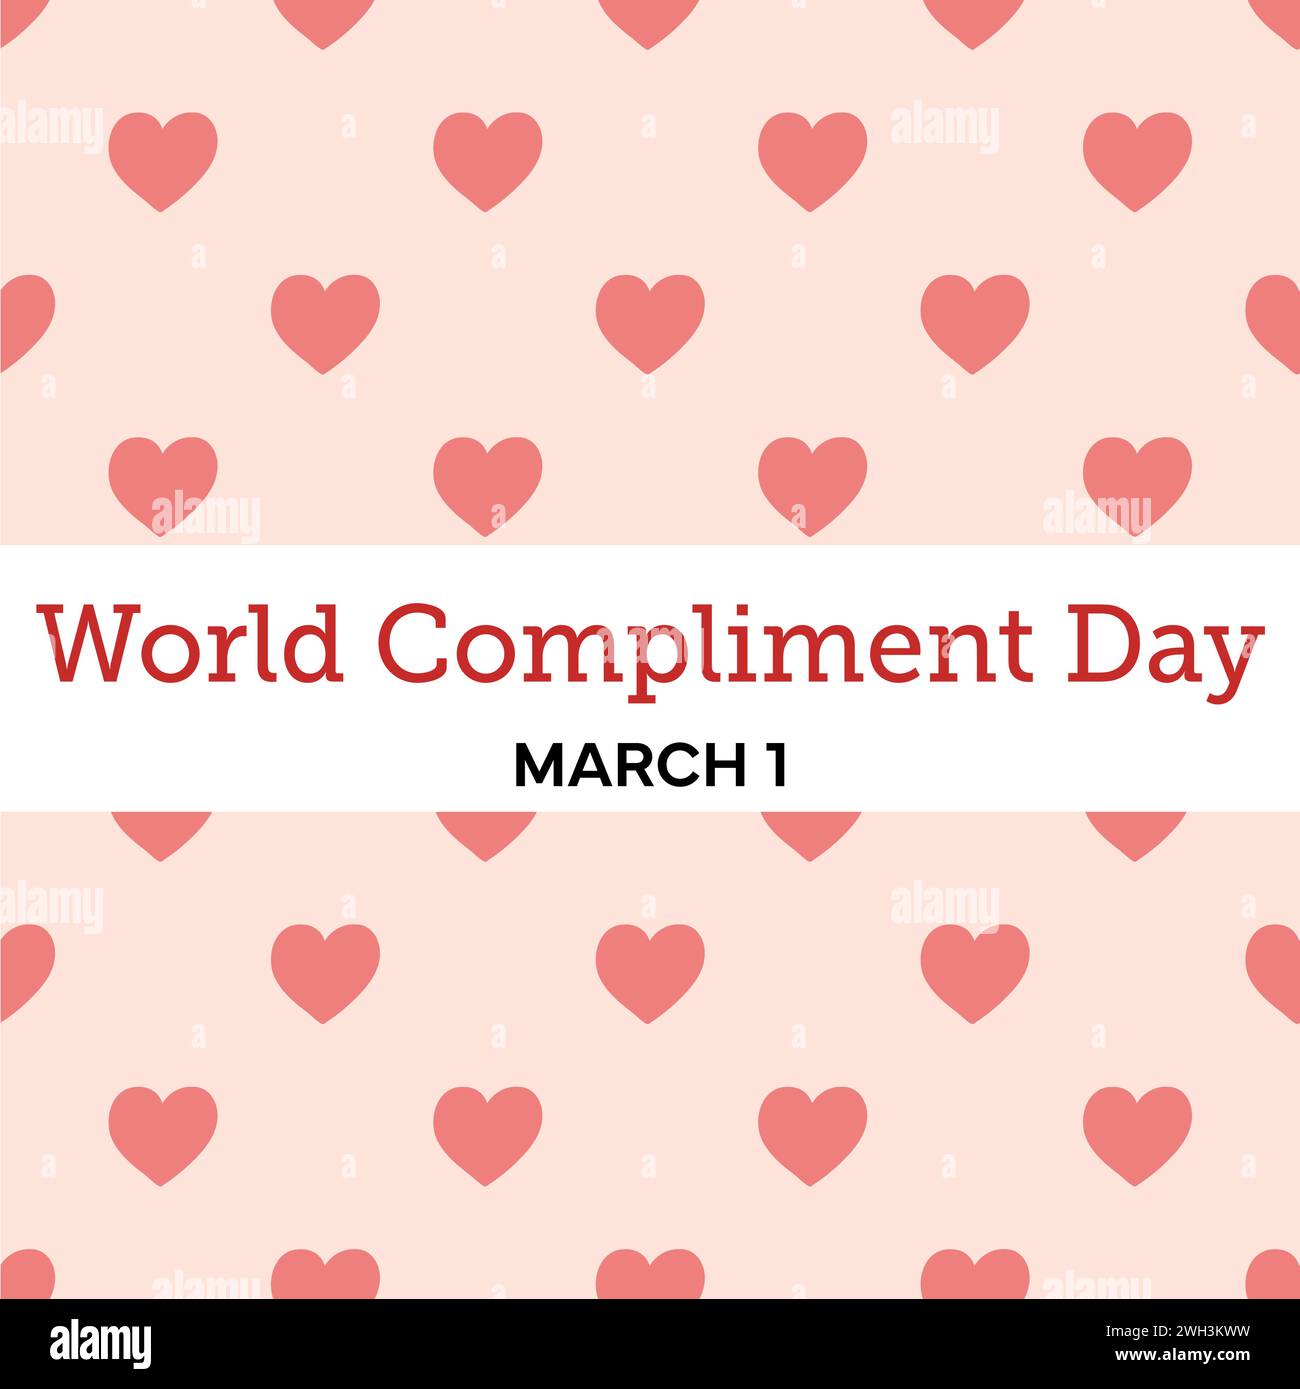 World Compliment Day concept. Seamless pattern with hearts, hand drawn illustration. Stock Vector